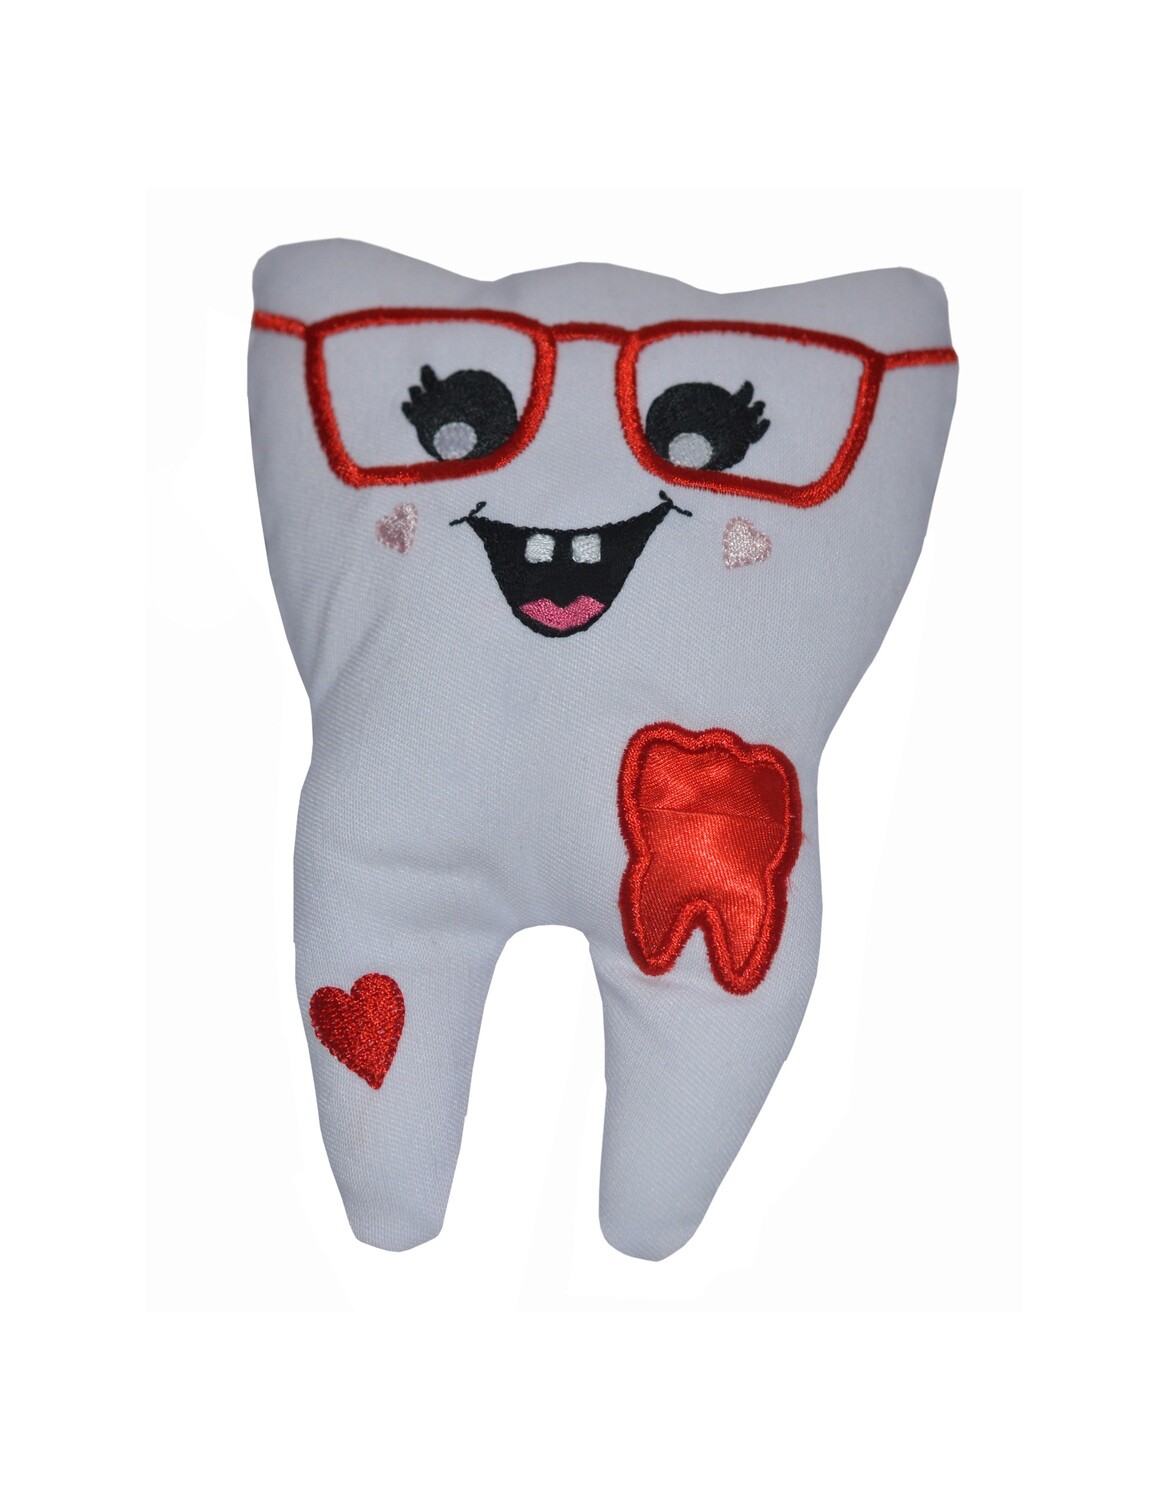 Tooth fairy pillow & Glasses, custom name and colour gift for kids coin pocket custom made gift for kids girls, baby milk teeth loss comforter, Diva door hanging tooth pillow UK